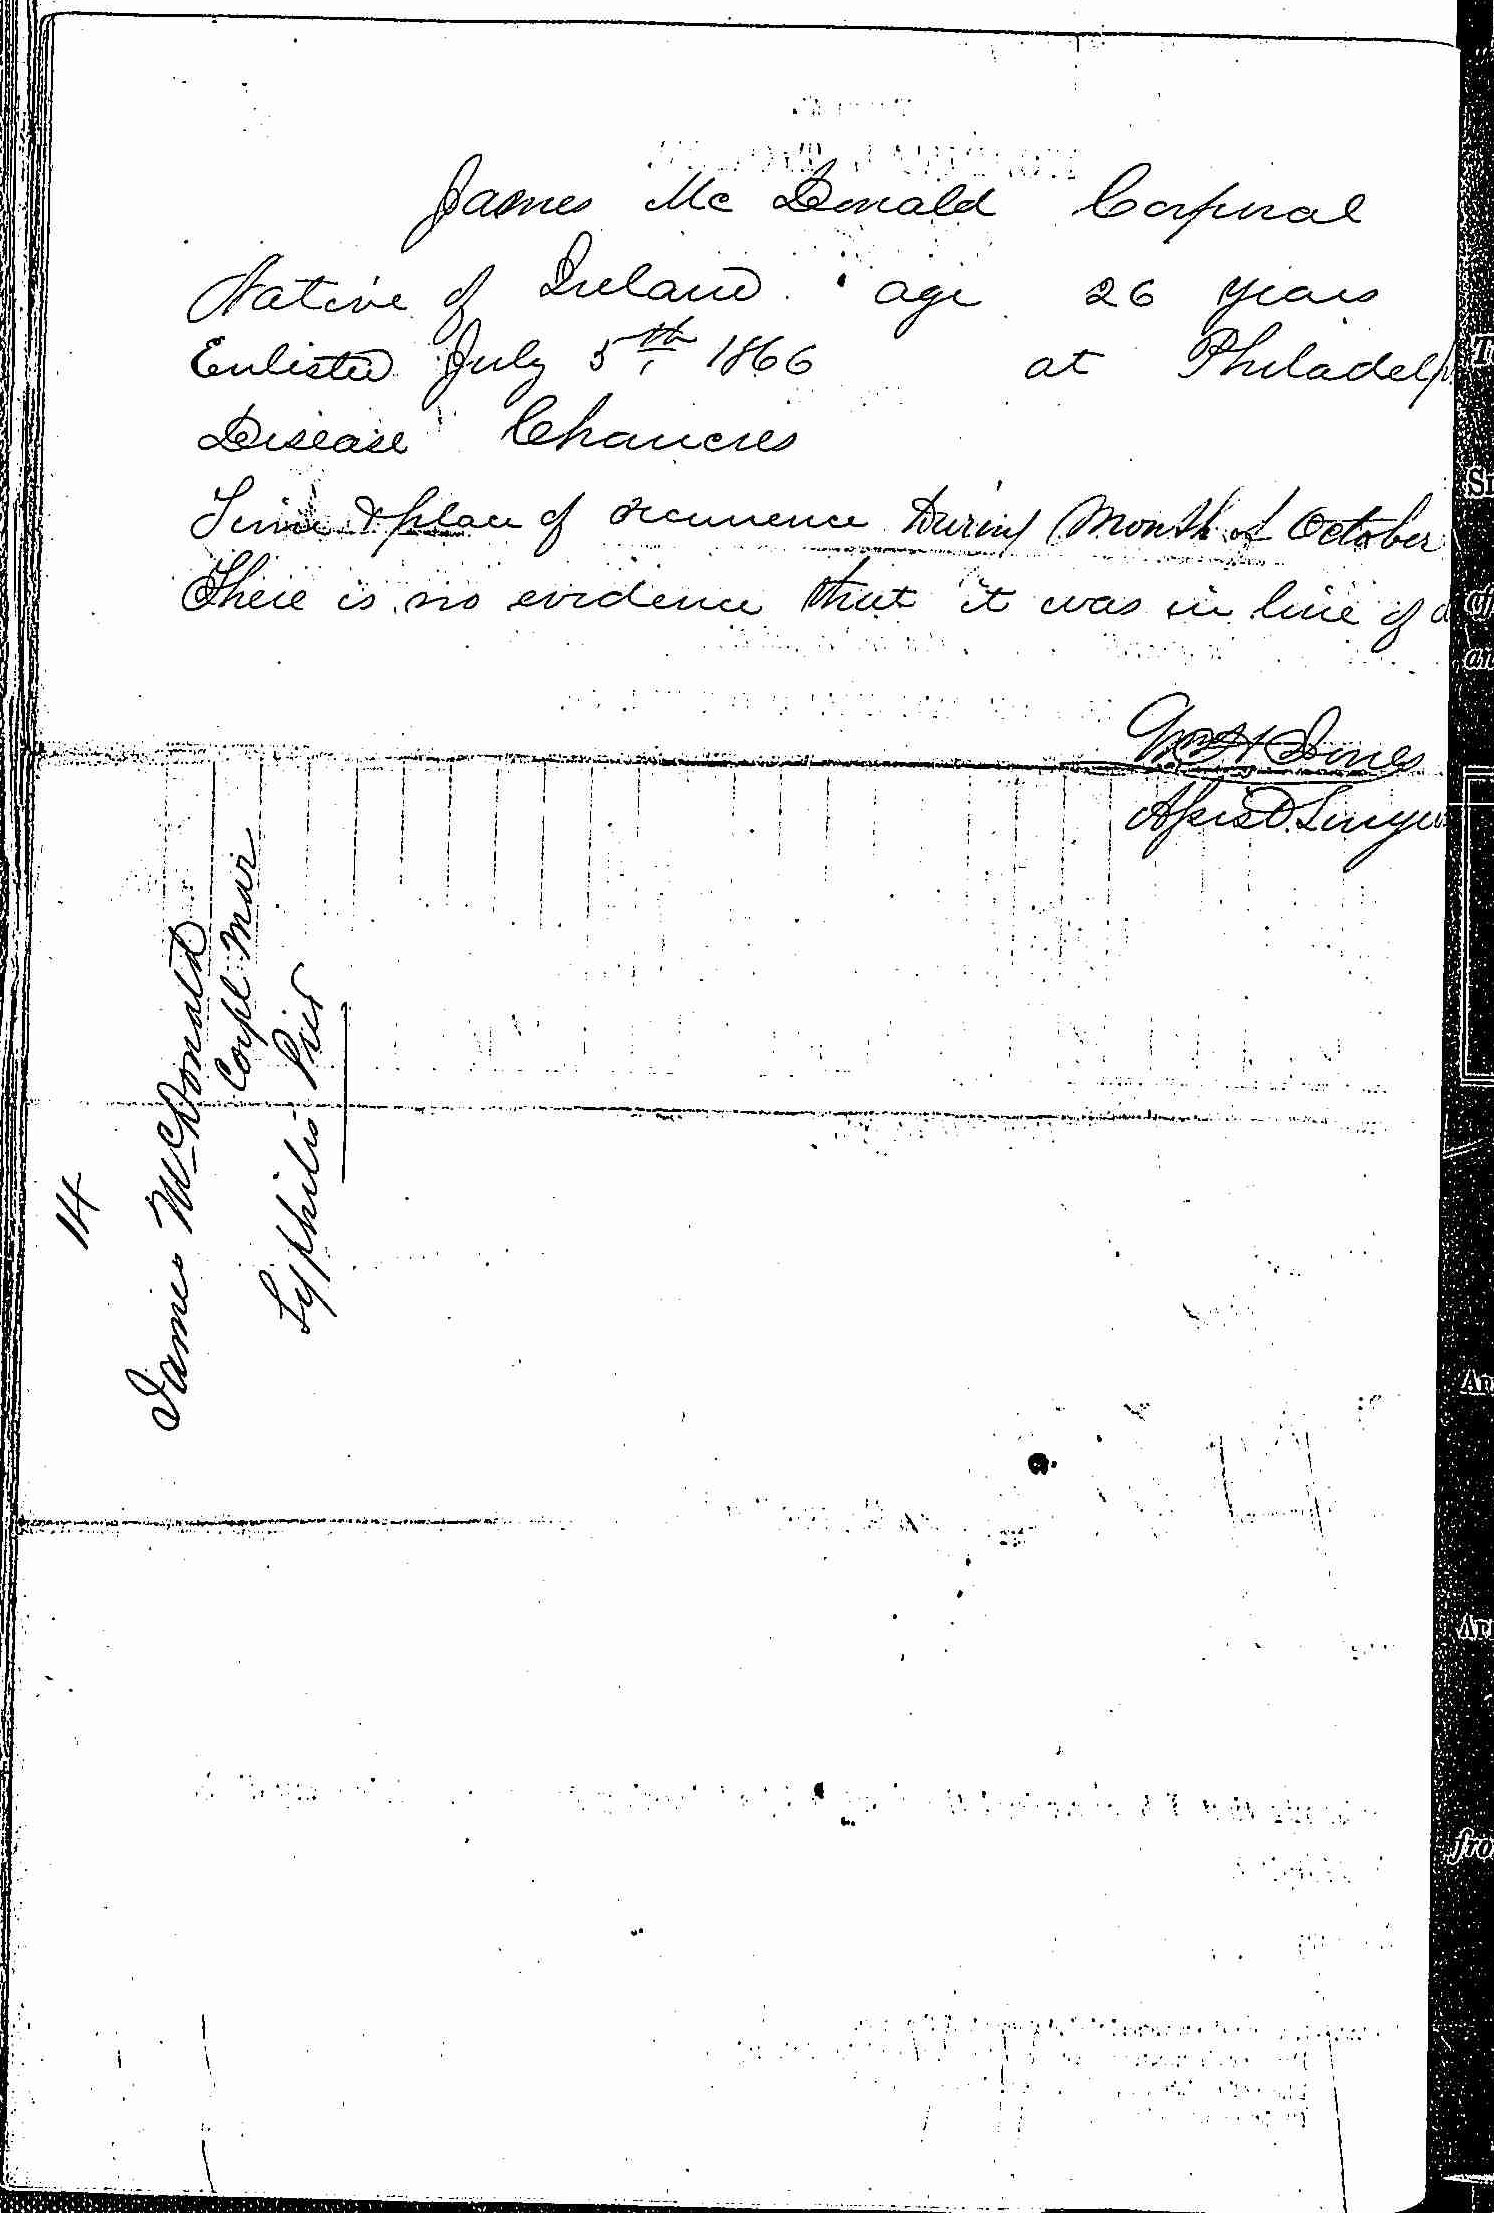 Entry for James McDonald (page 2 of 2) in the log Hospital Tickets and Case Papers - Naval Hospital - Washington, D.C. - 1865-68